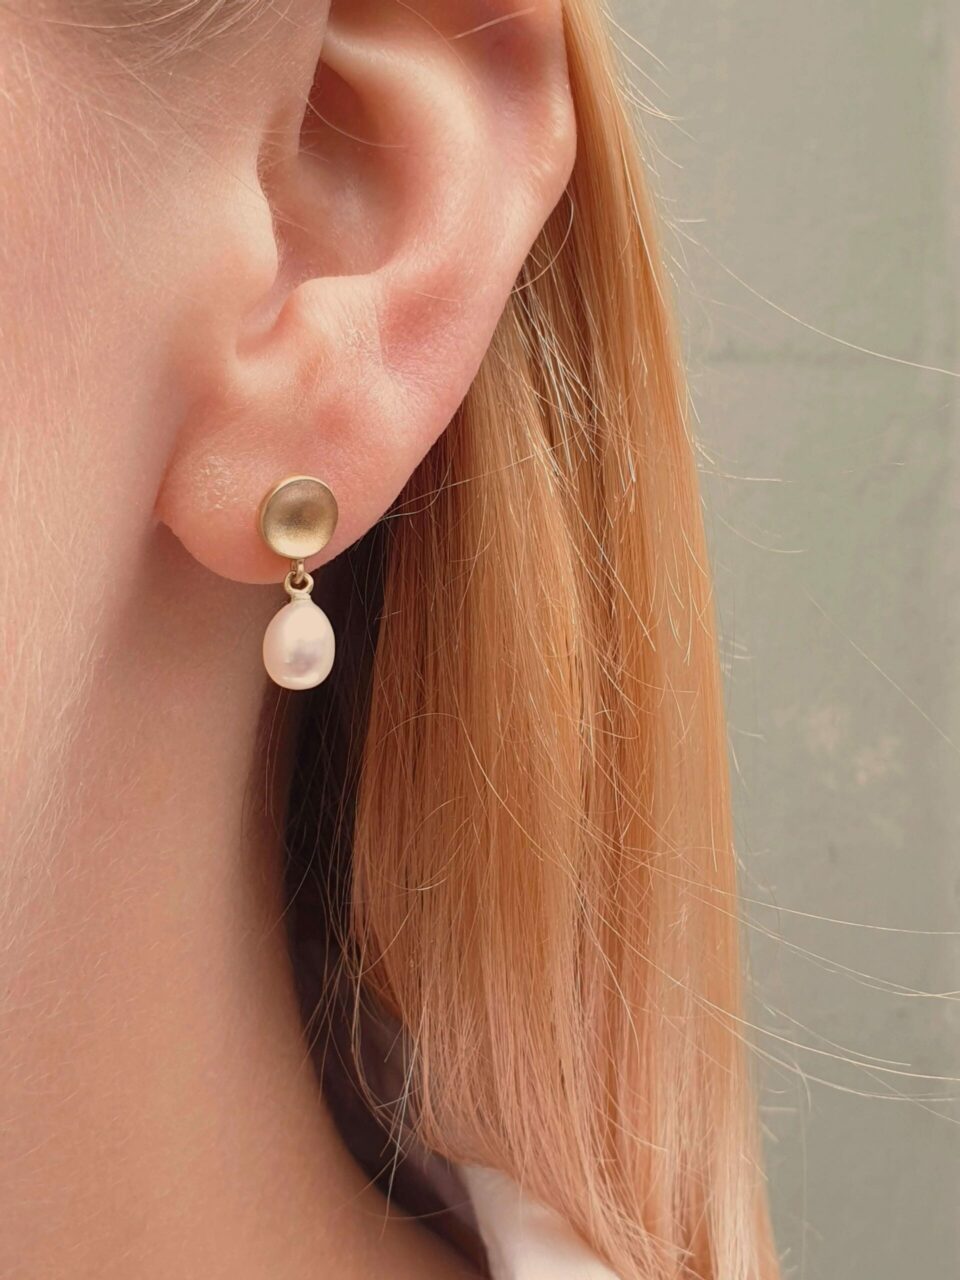 Based on our classic dome collection, these pearl drop dome earrings have been designed by Clifton Rocks founder Clare Chandler and feature a subtle dome design that is completed with a stunning pearl drop. This piece is an elegant addition to any bridal look and its timeless feel also makes it the perfect gift for your loved one.